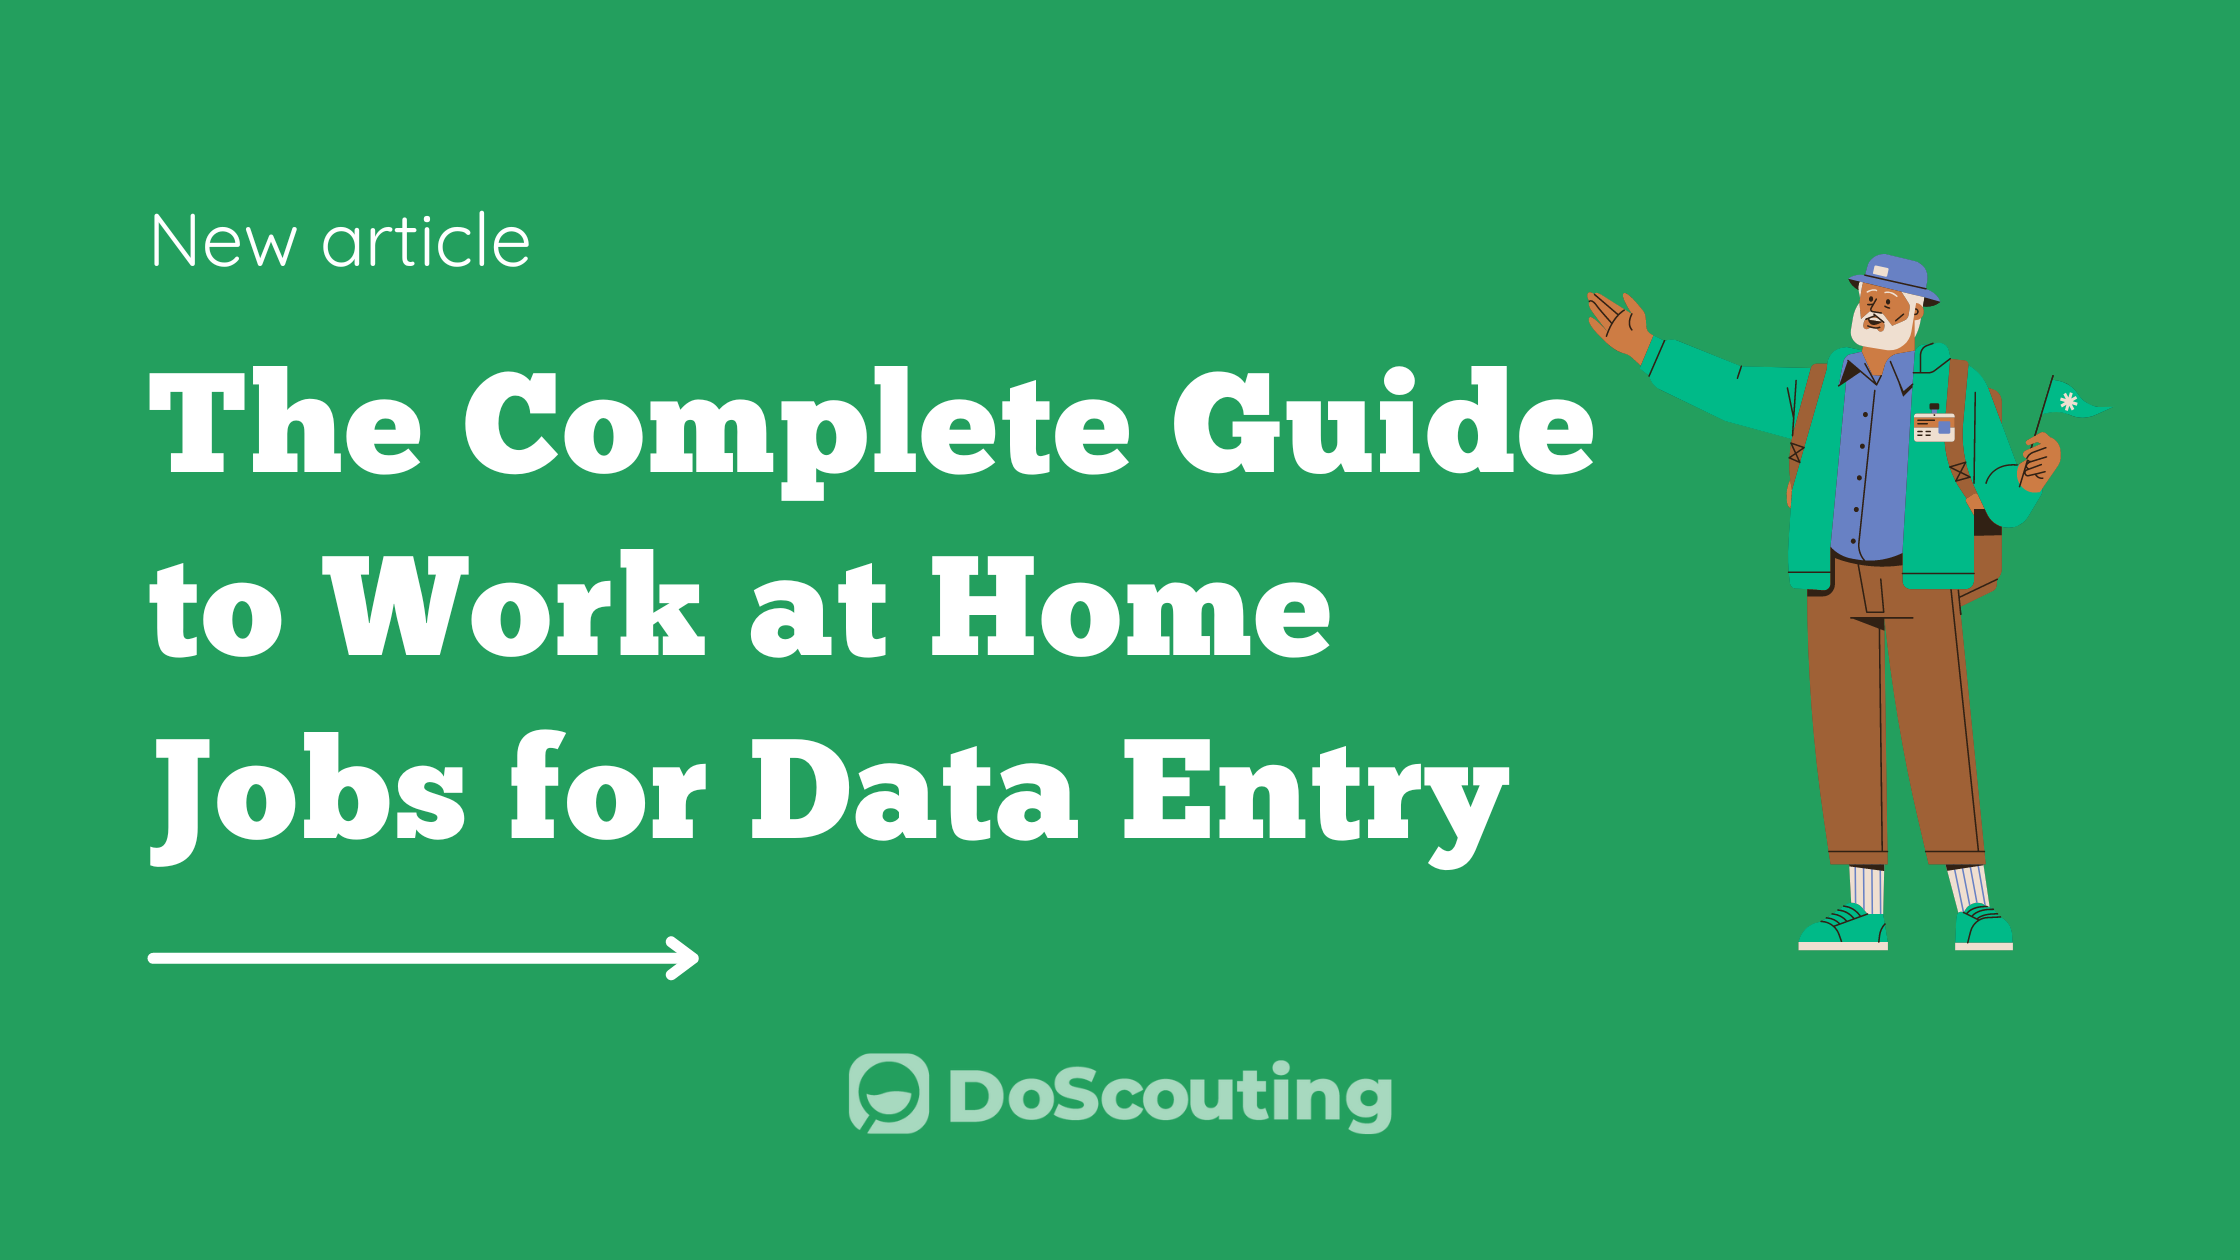 The Complete Guide to Work at Home Jobs for Data Entry